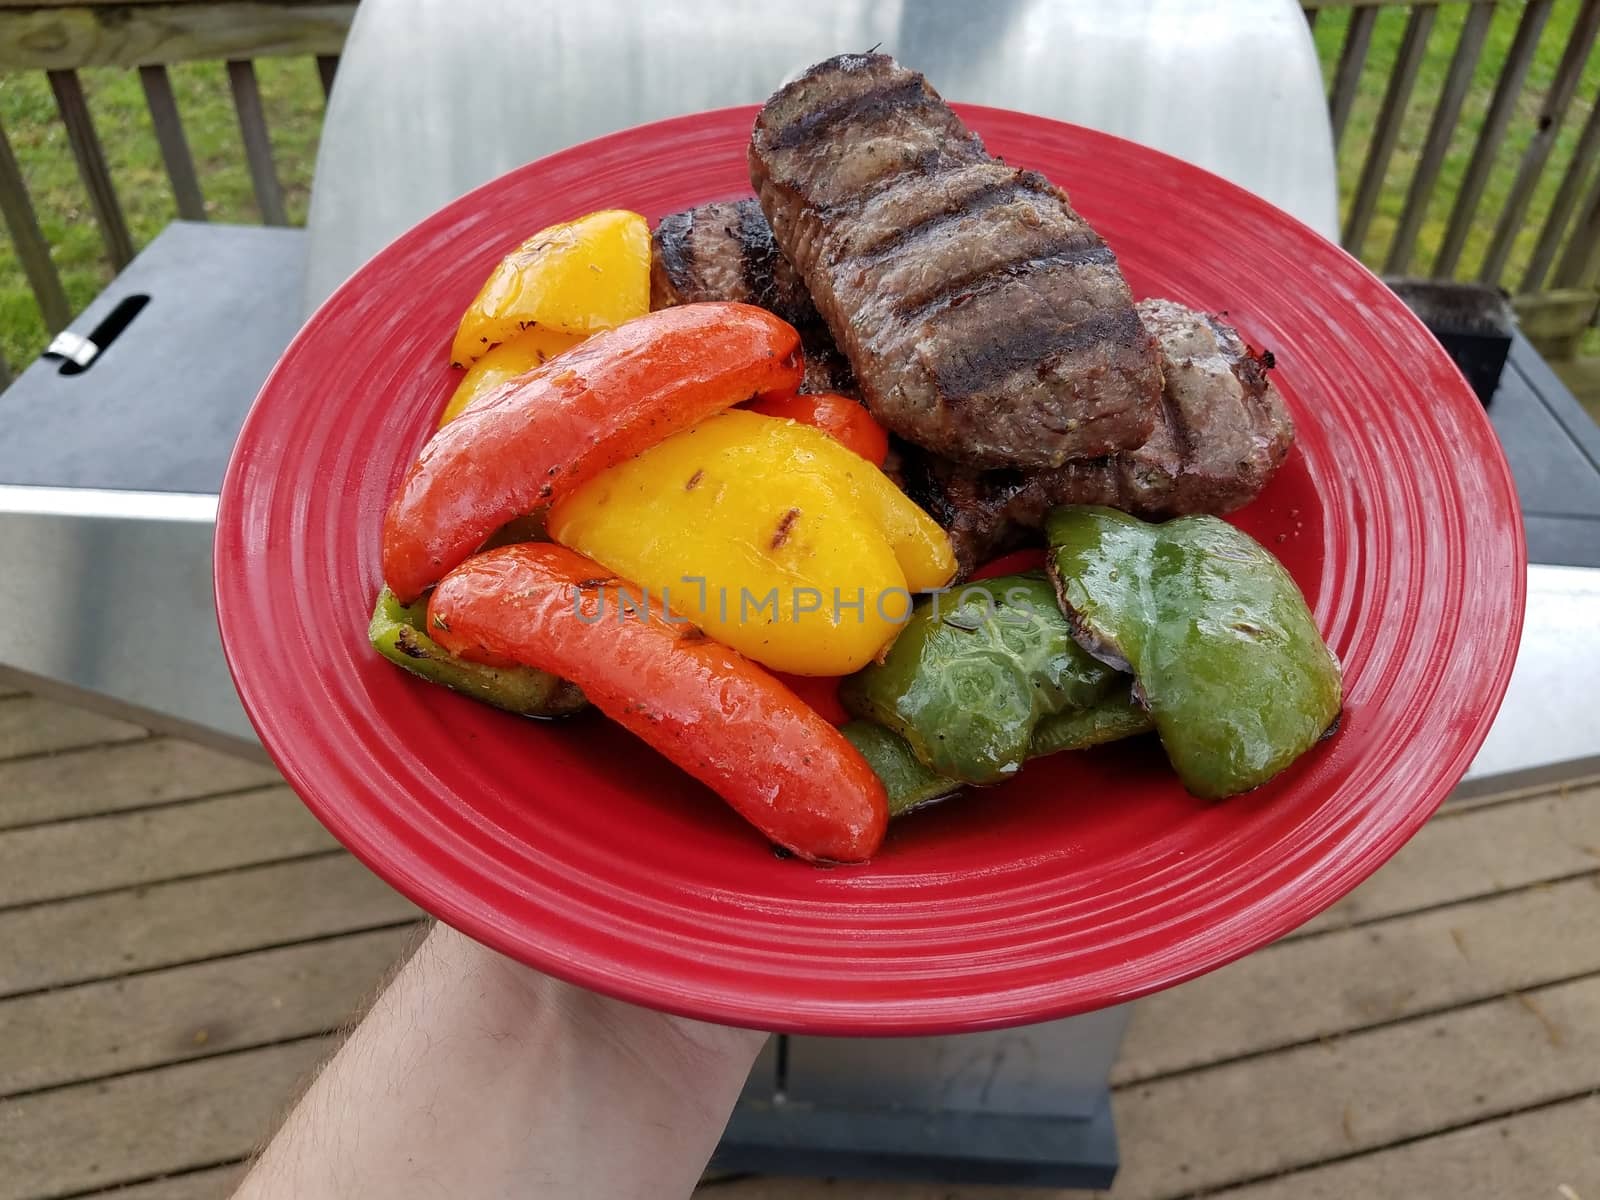 hand holding red plate with grilled steak and red yellow and green peppers by stockphotofan1